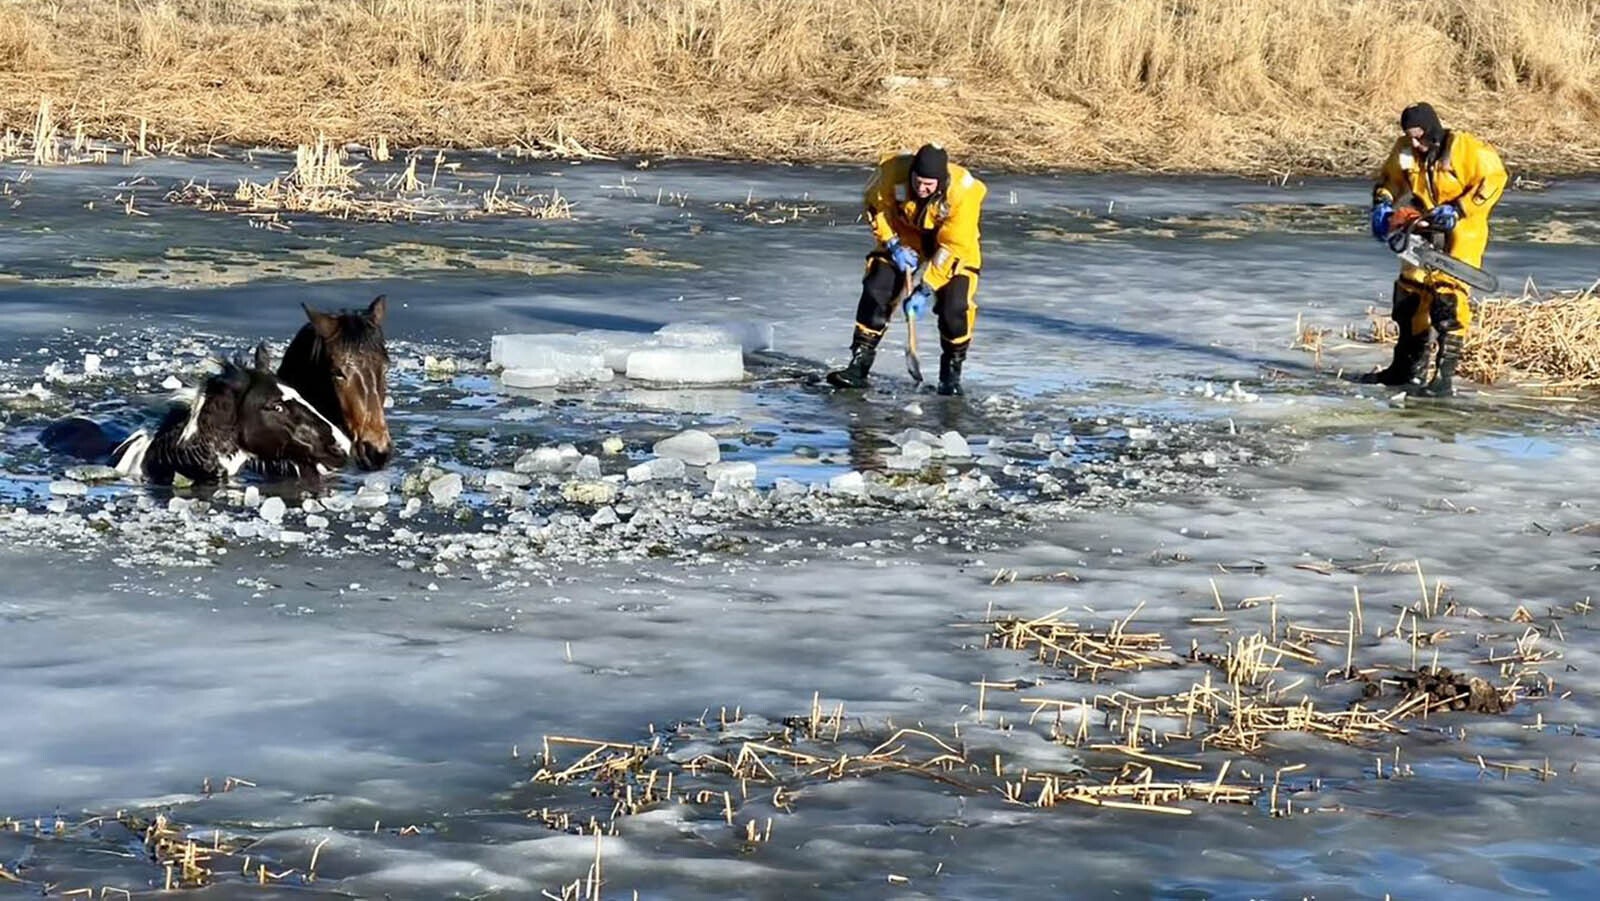 Campbell County Fire Department responders work with chainsaws and other equipment to free a pair of horses that fell into an icy pond Jan. 30, 2024. The horses eventually made their way out and survived.